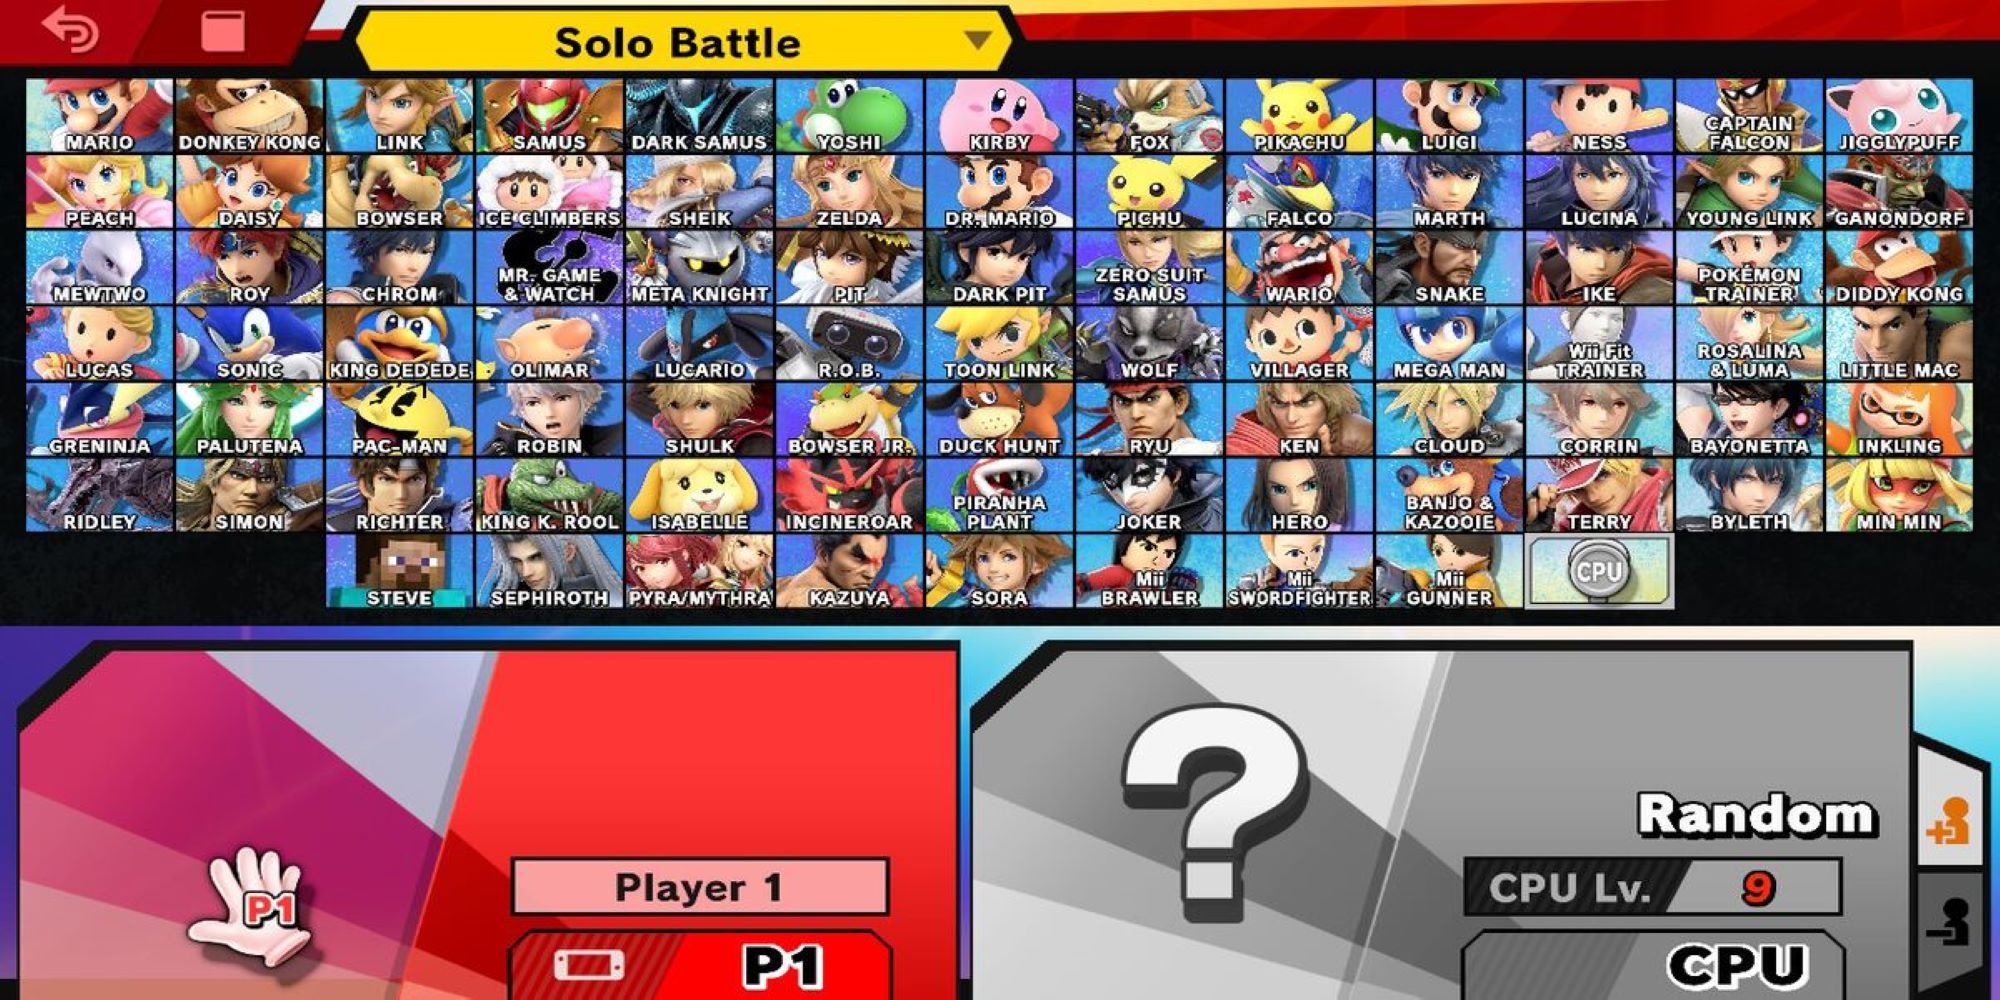 The final roster for Super Smash Bros Ultimate, featuring 86 fighters in total.